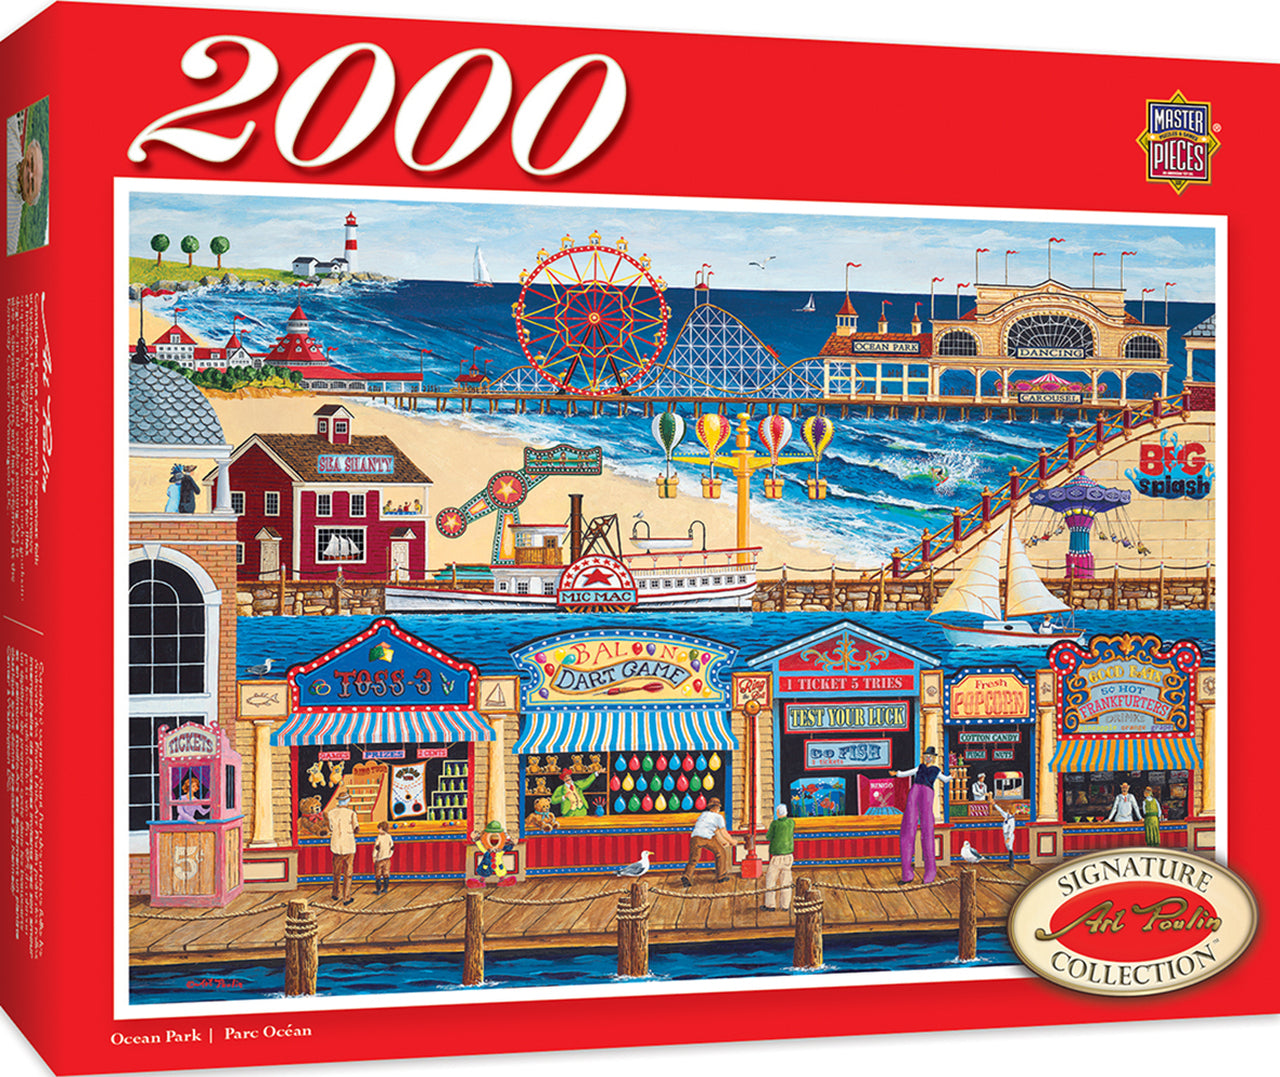 Signature Series Ocean Park 2000 Piece Jigsaw Puzzle by Masterpieces